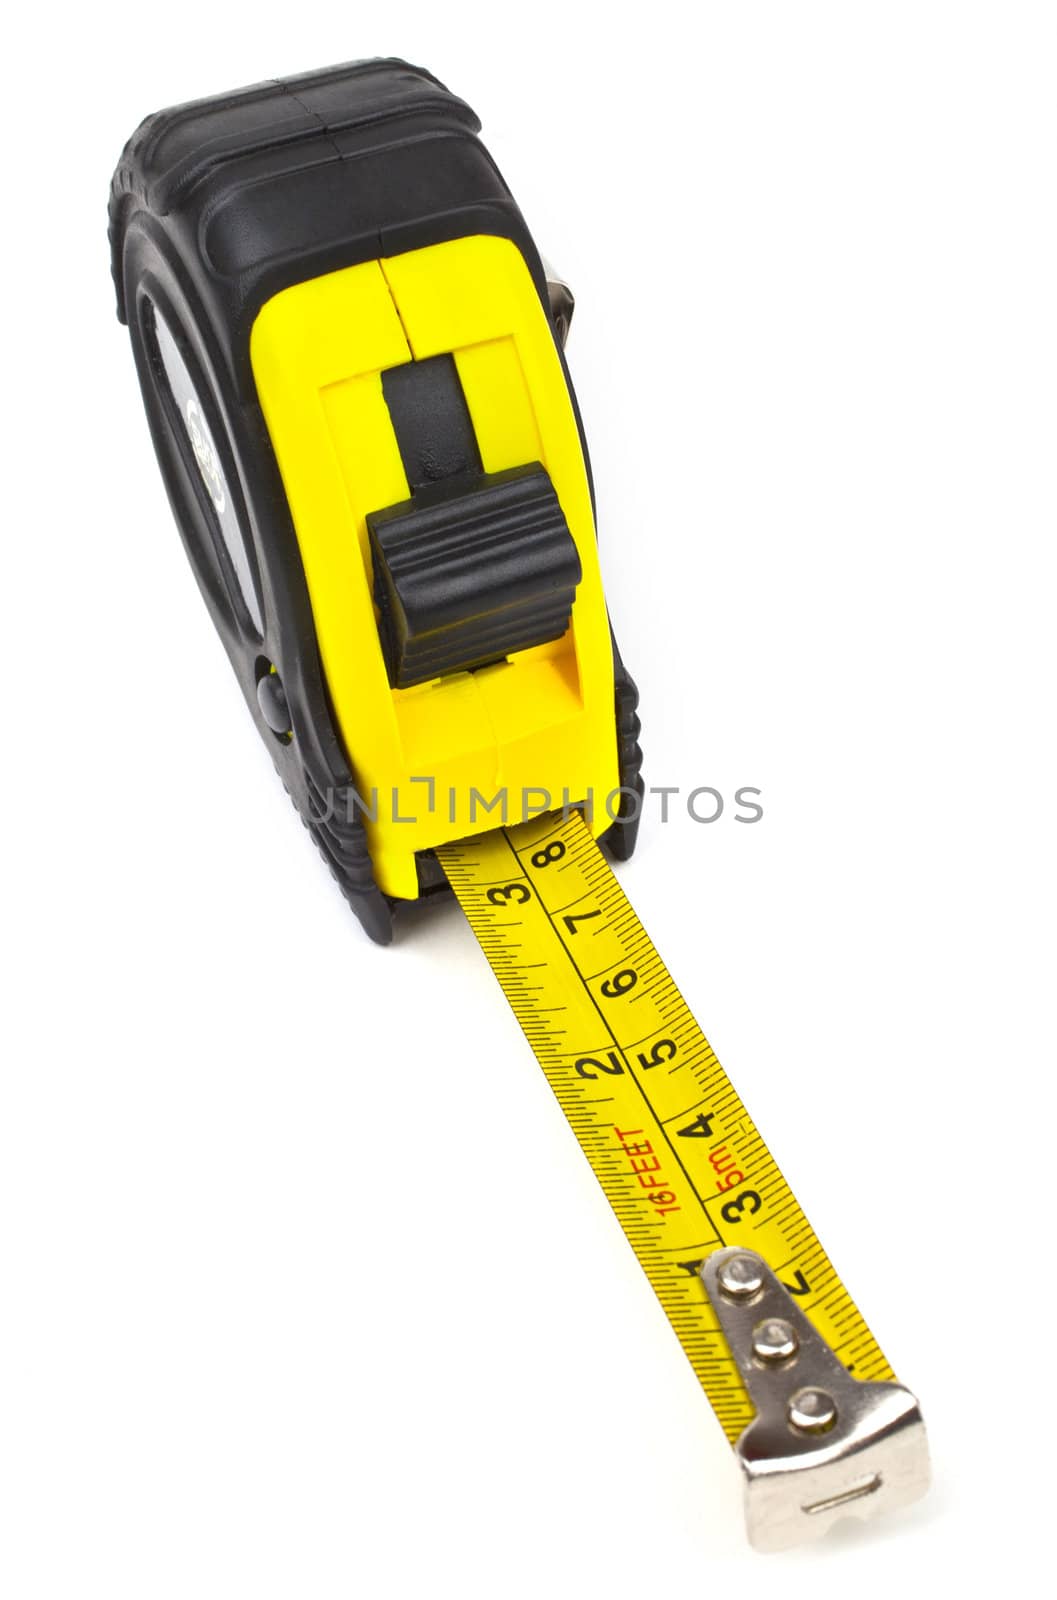 A tape measure on a white background.